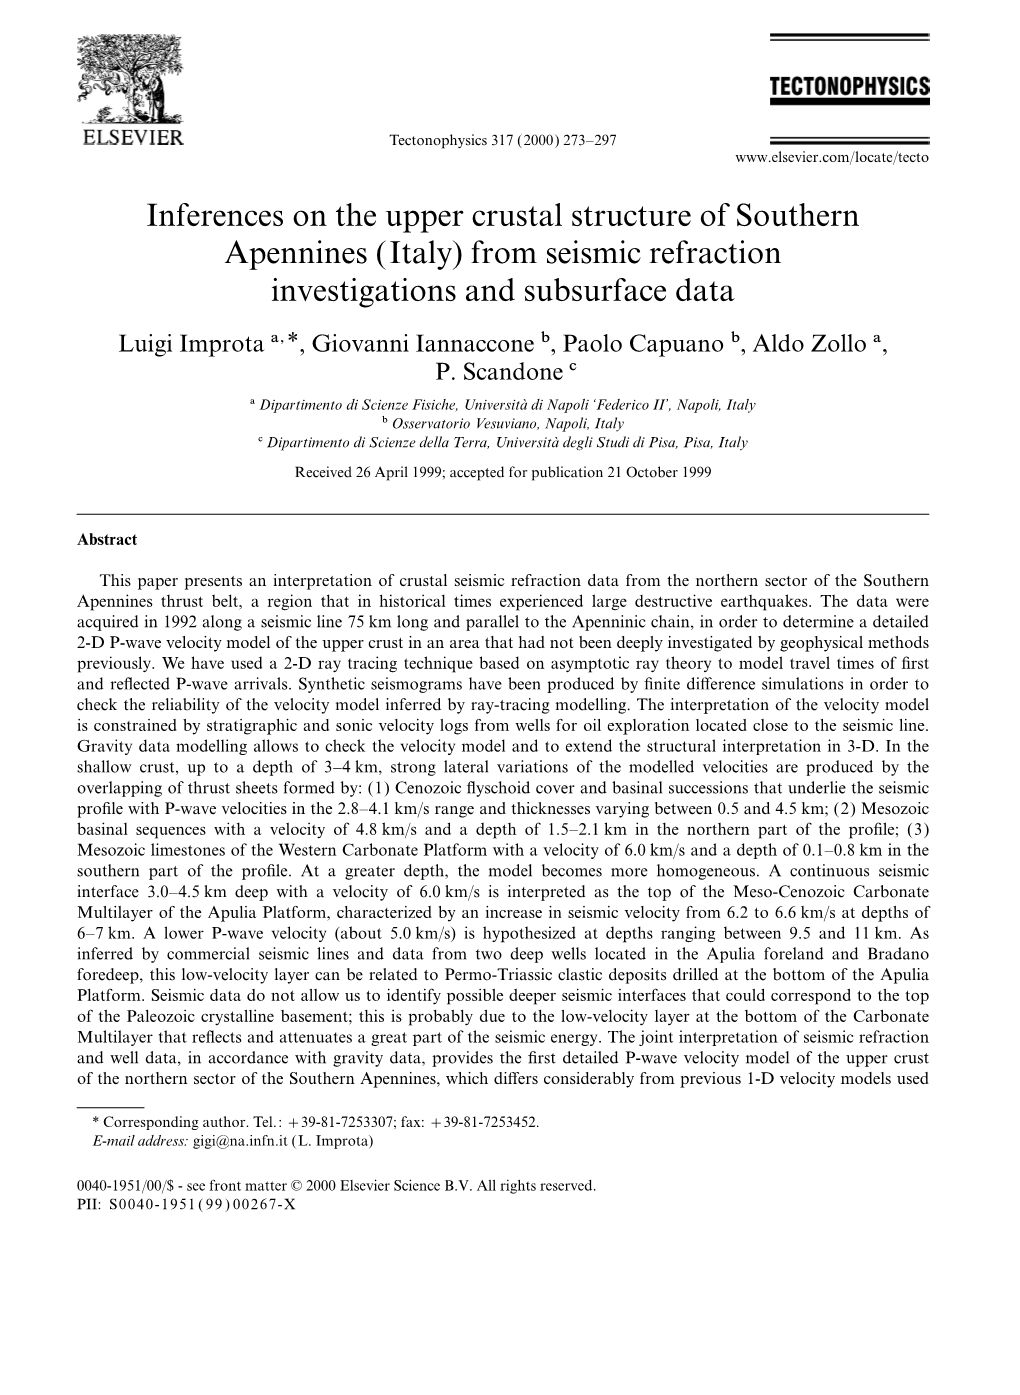 Inferences on the Upper Crustal Structure of Southern Apennines (Italy) from Seismic Refraction Investigations and Subsurface Data